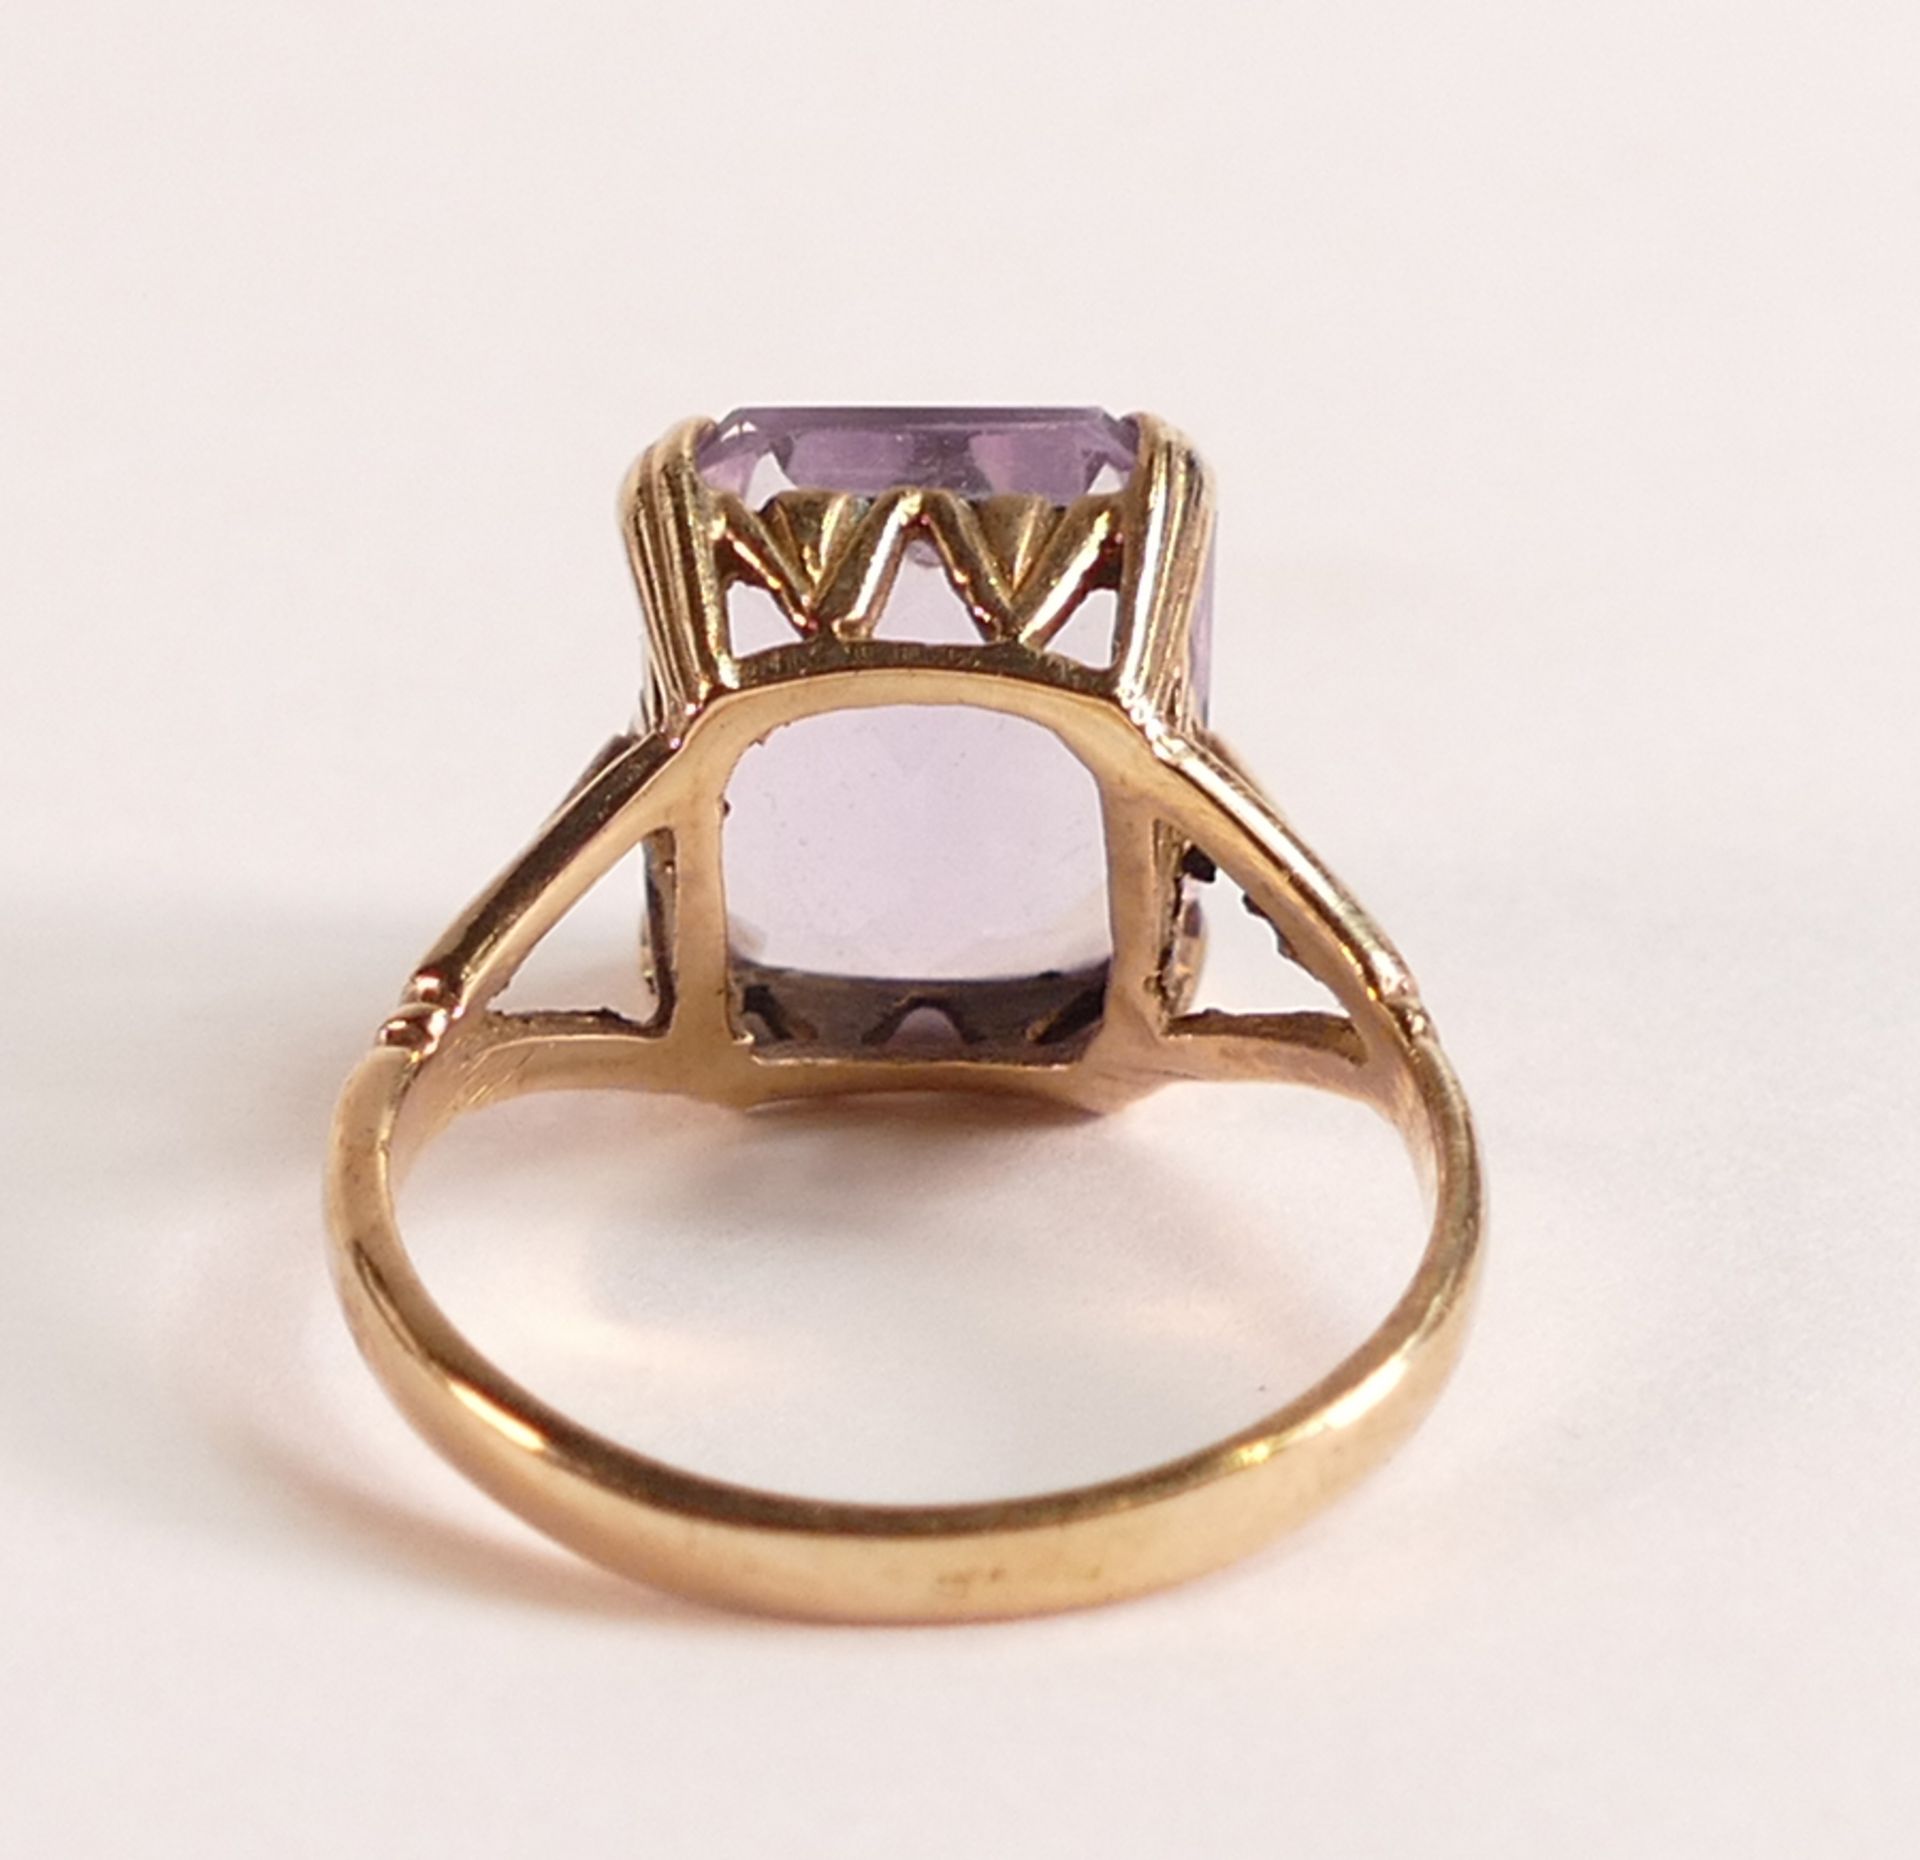 9ct Gold Lavender Quartz Ring - The ring mount is solid 9ct yellow gold, hallmarked 375 and - Image 3 of 3